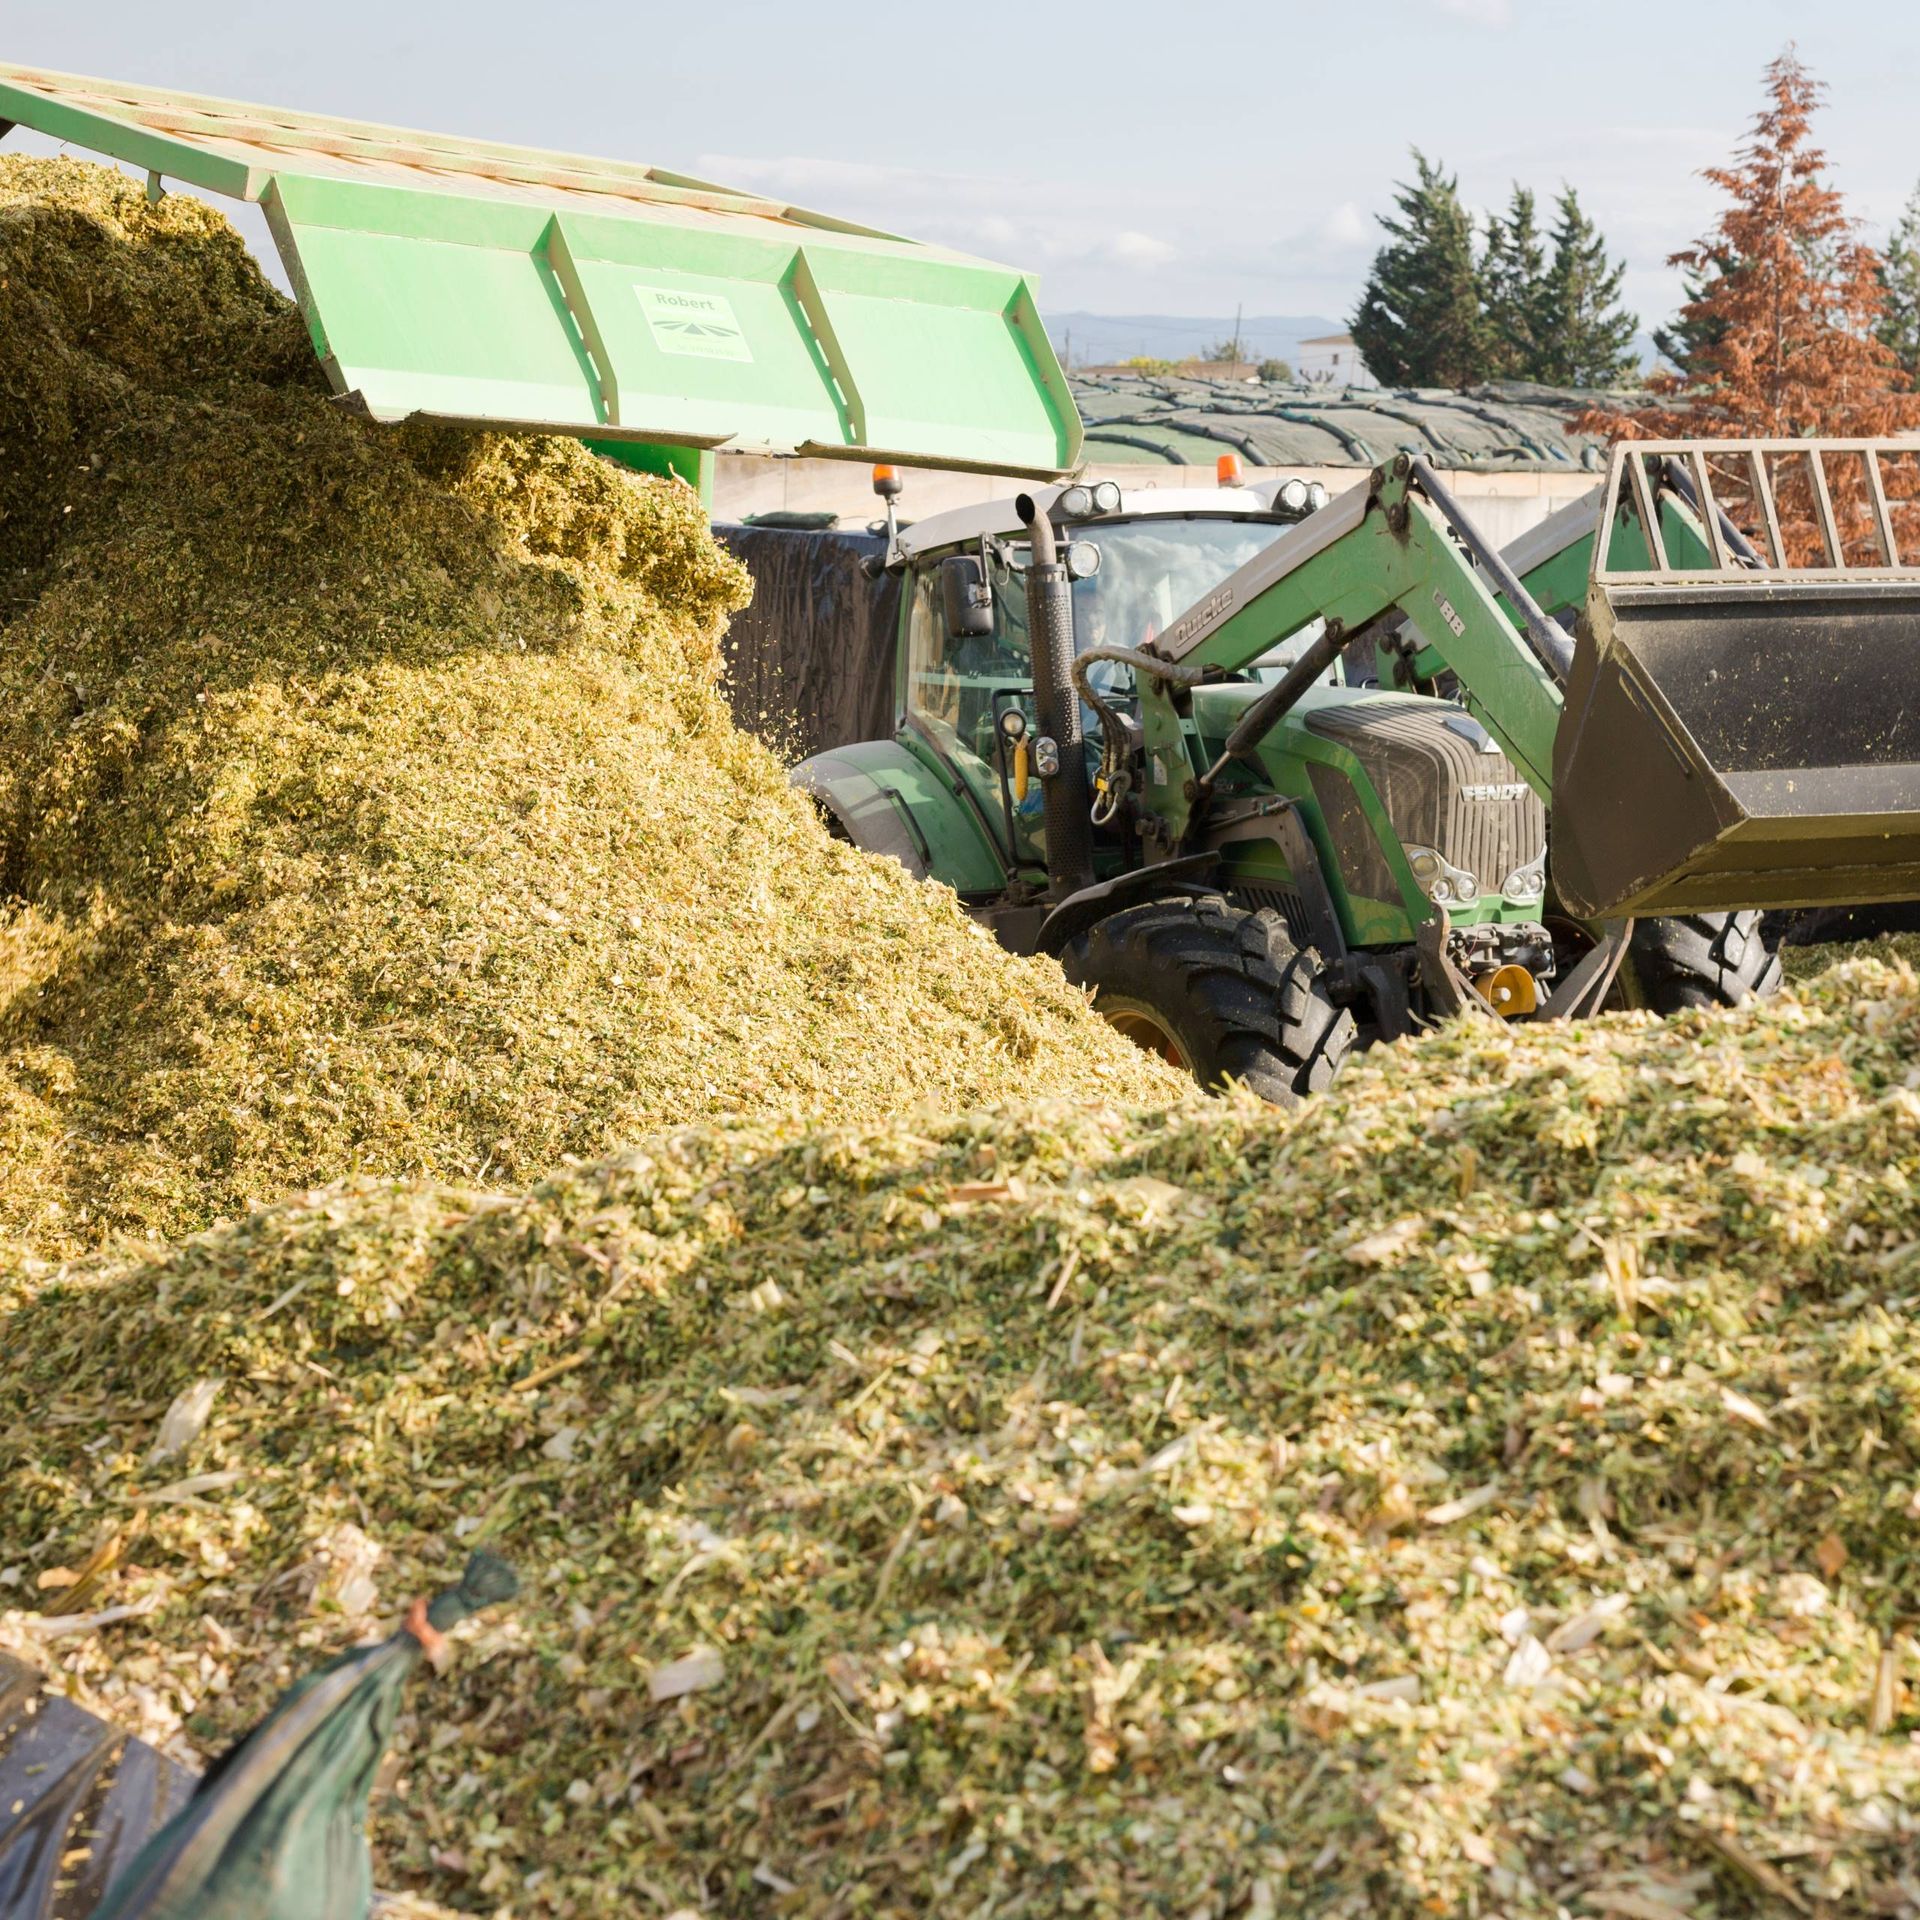 Image of a feed mill with a tractor unloading feed ingredients